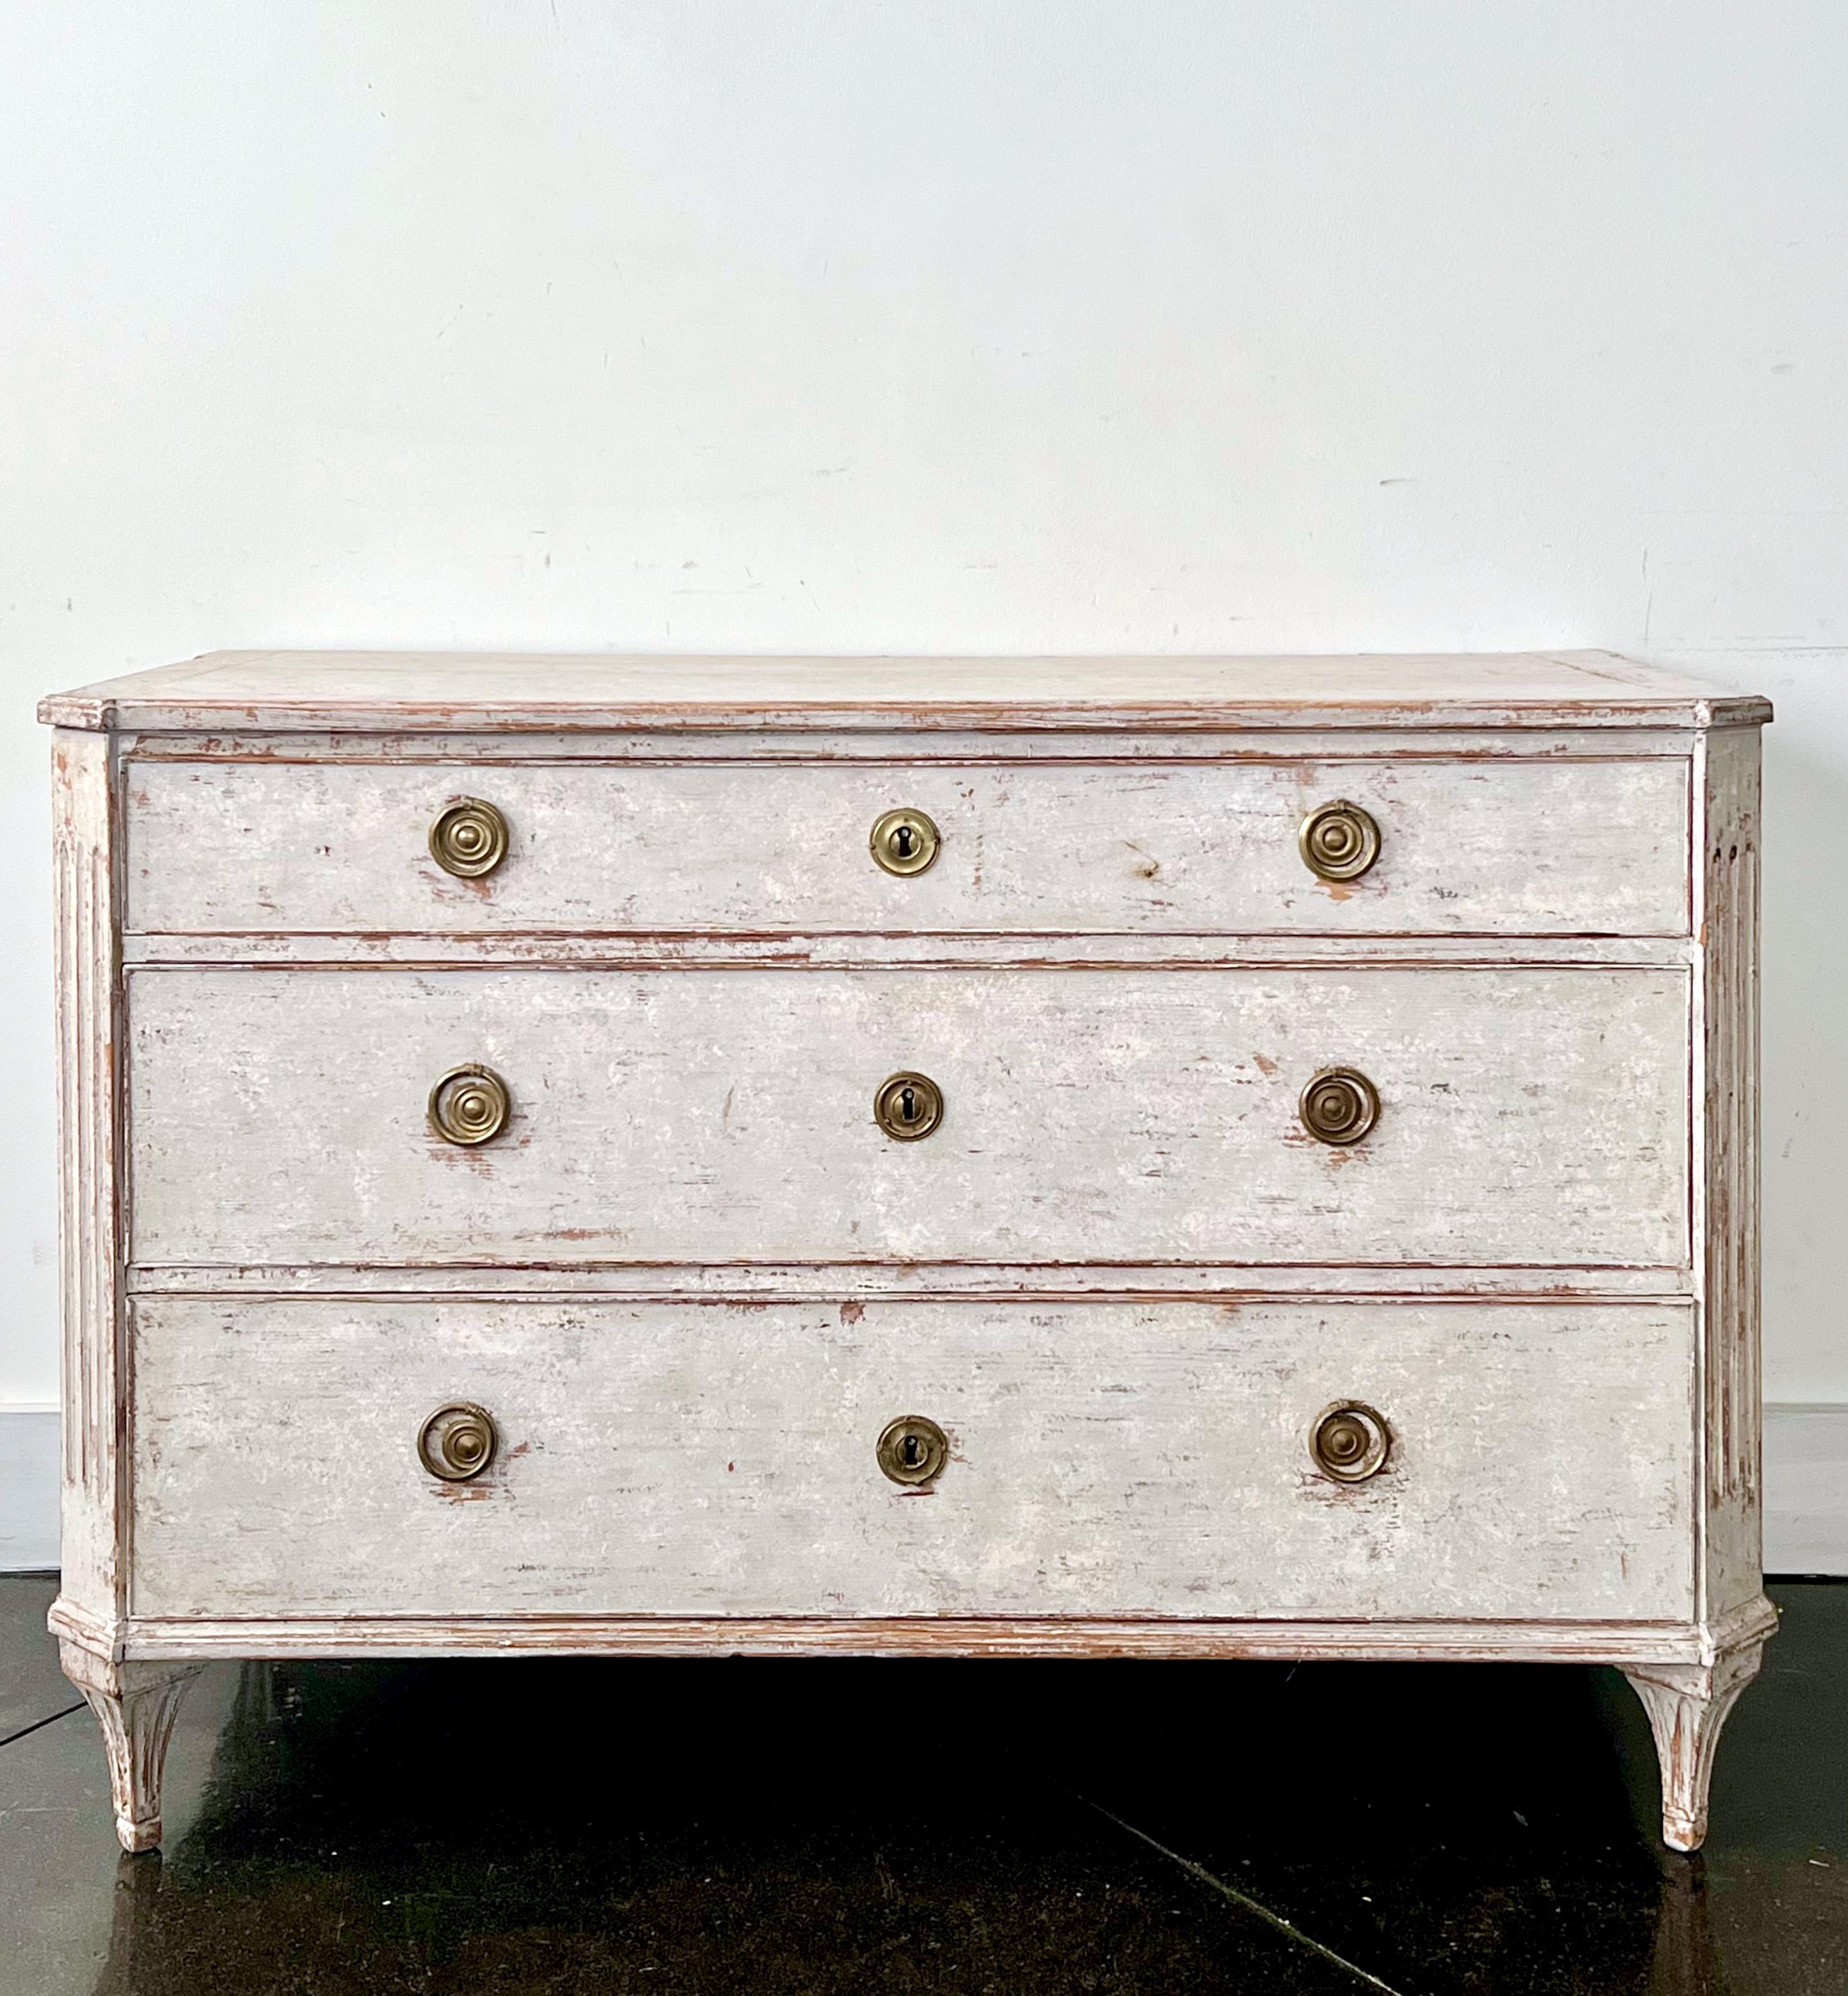 A Charming, large Swedish Gustavian period chest of drawers with original hardware and in wonderful worn lightest of light blue paint.
Canted posts with fluted details, handsome original large iron handles on the side panels and fluted, delicate